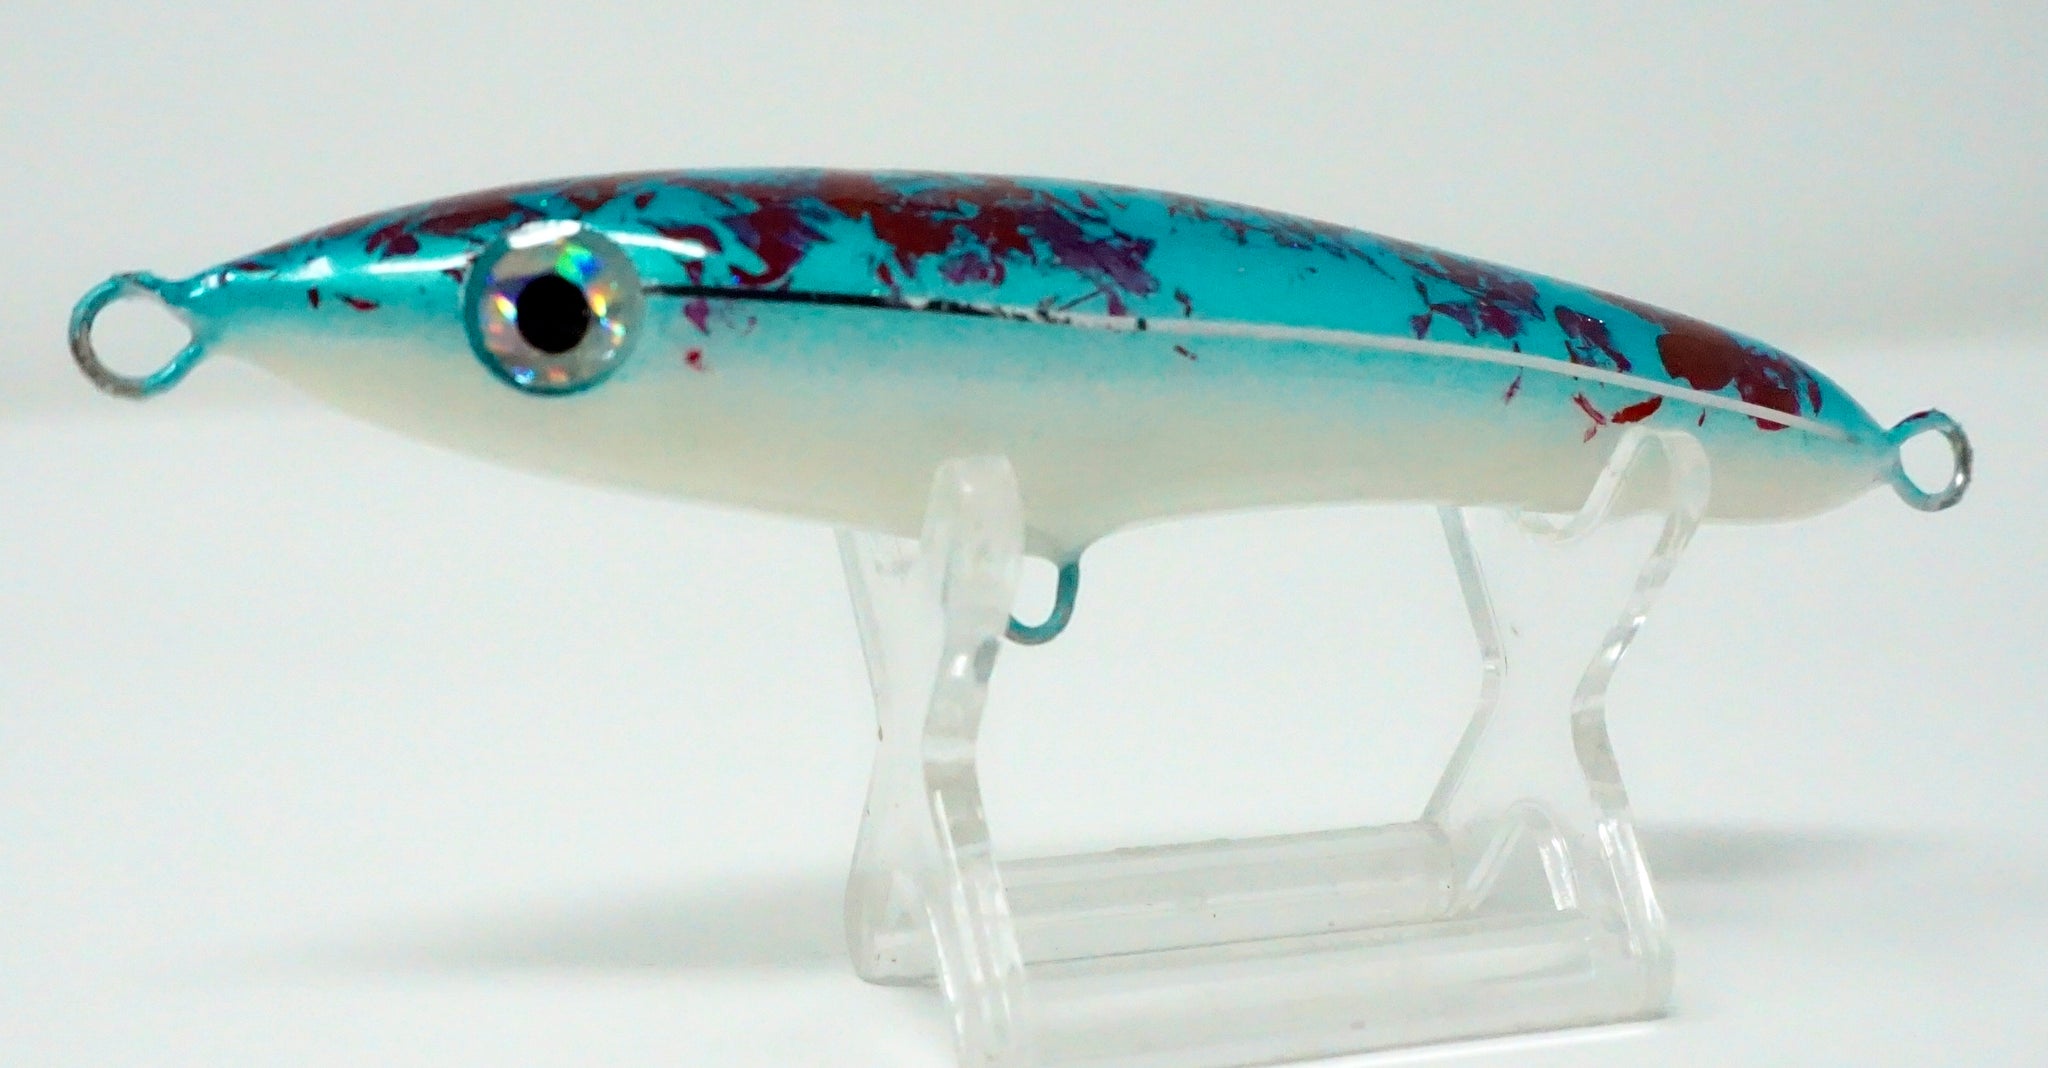 Blue Water Candy Bling Duster Lures - Capt. Harry's Fishing Supply